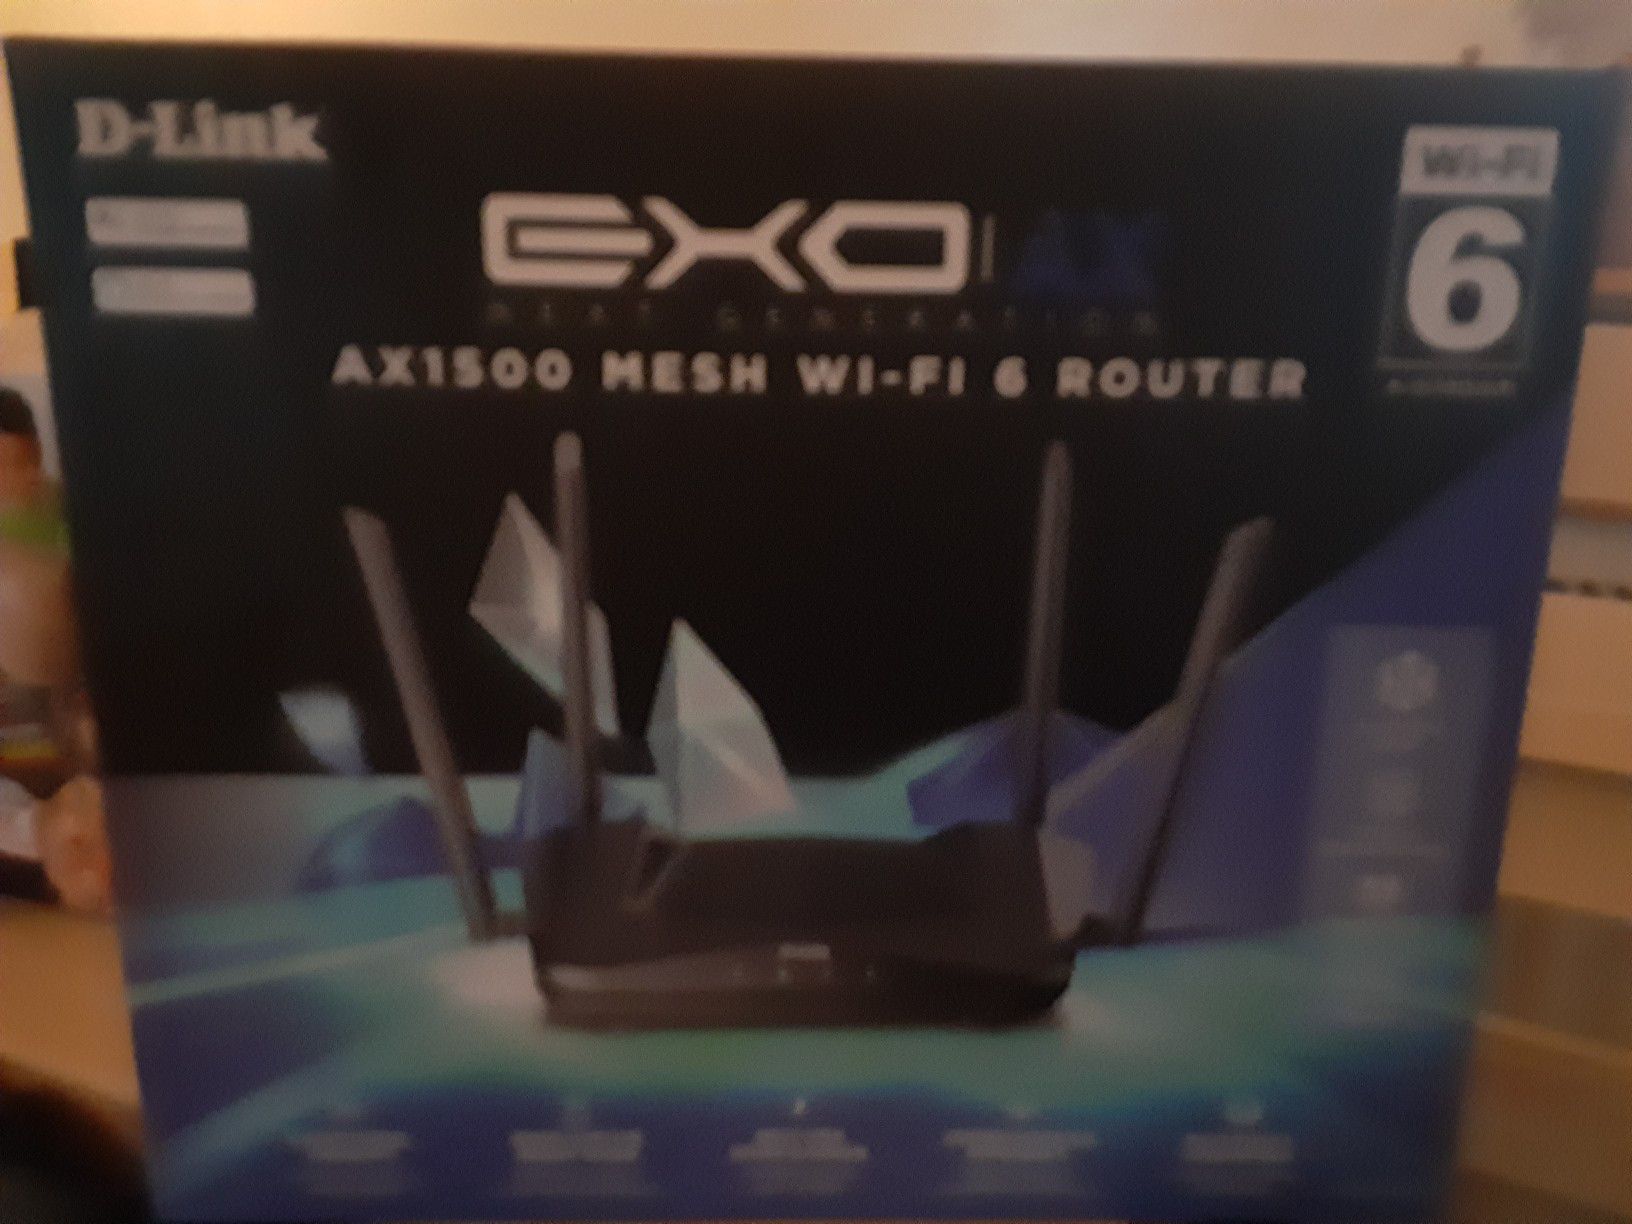 Dlink ax 1500 mesh wifi 6 router"Brand new"